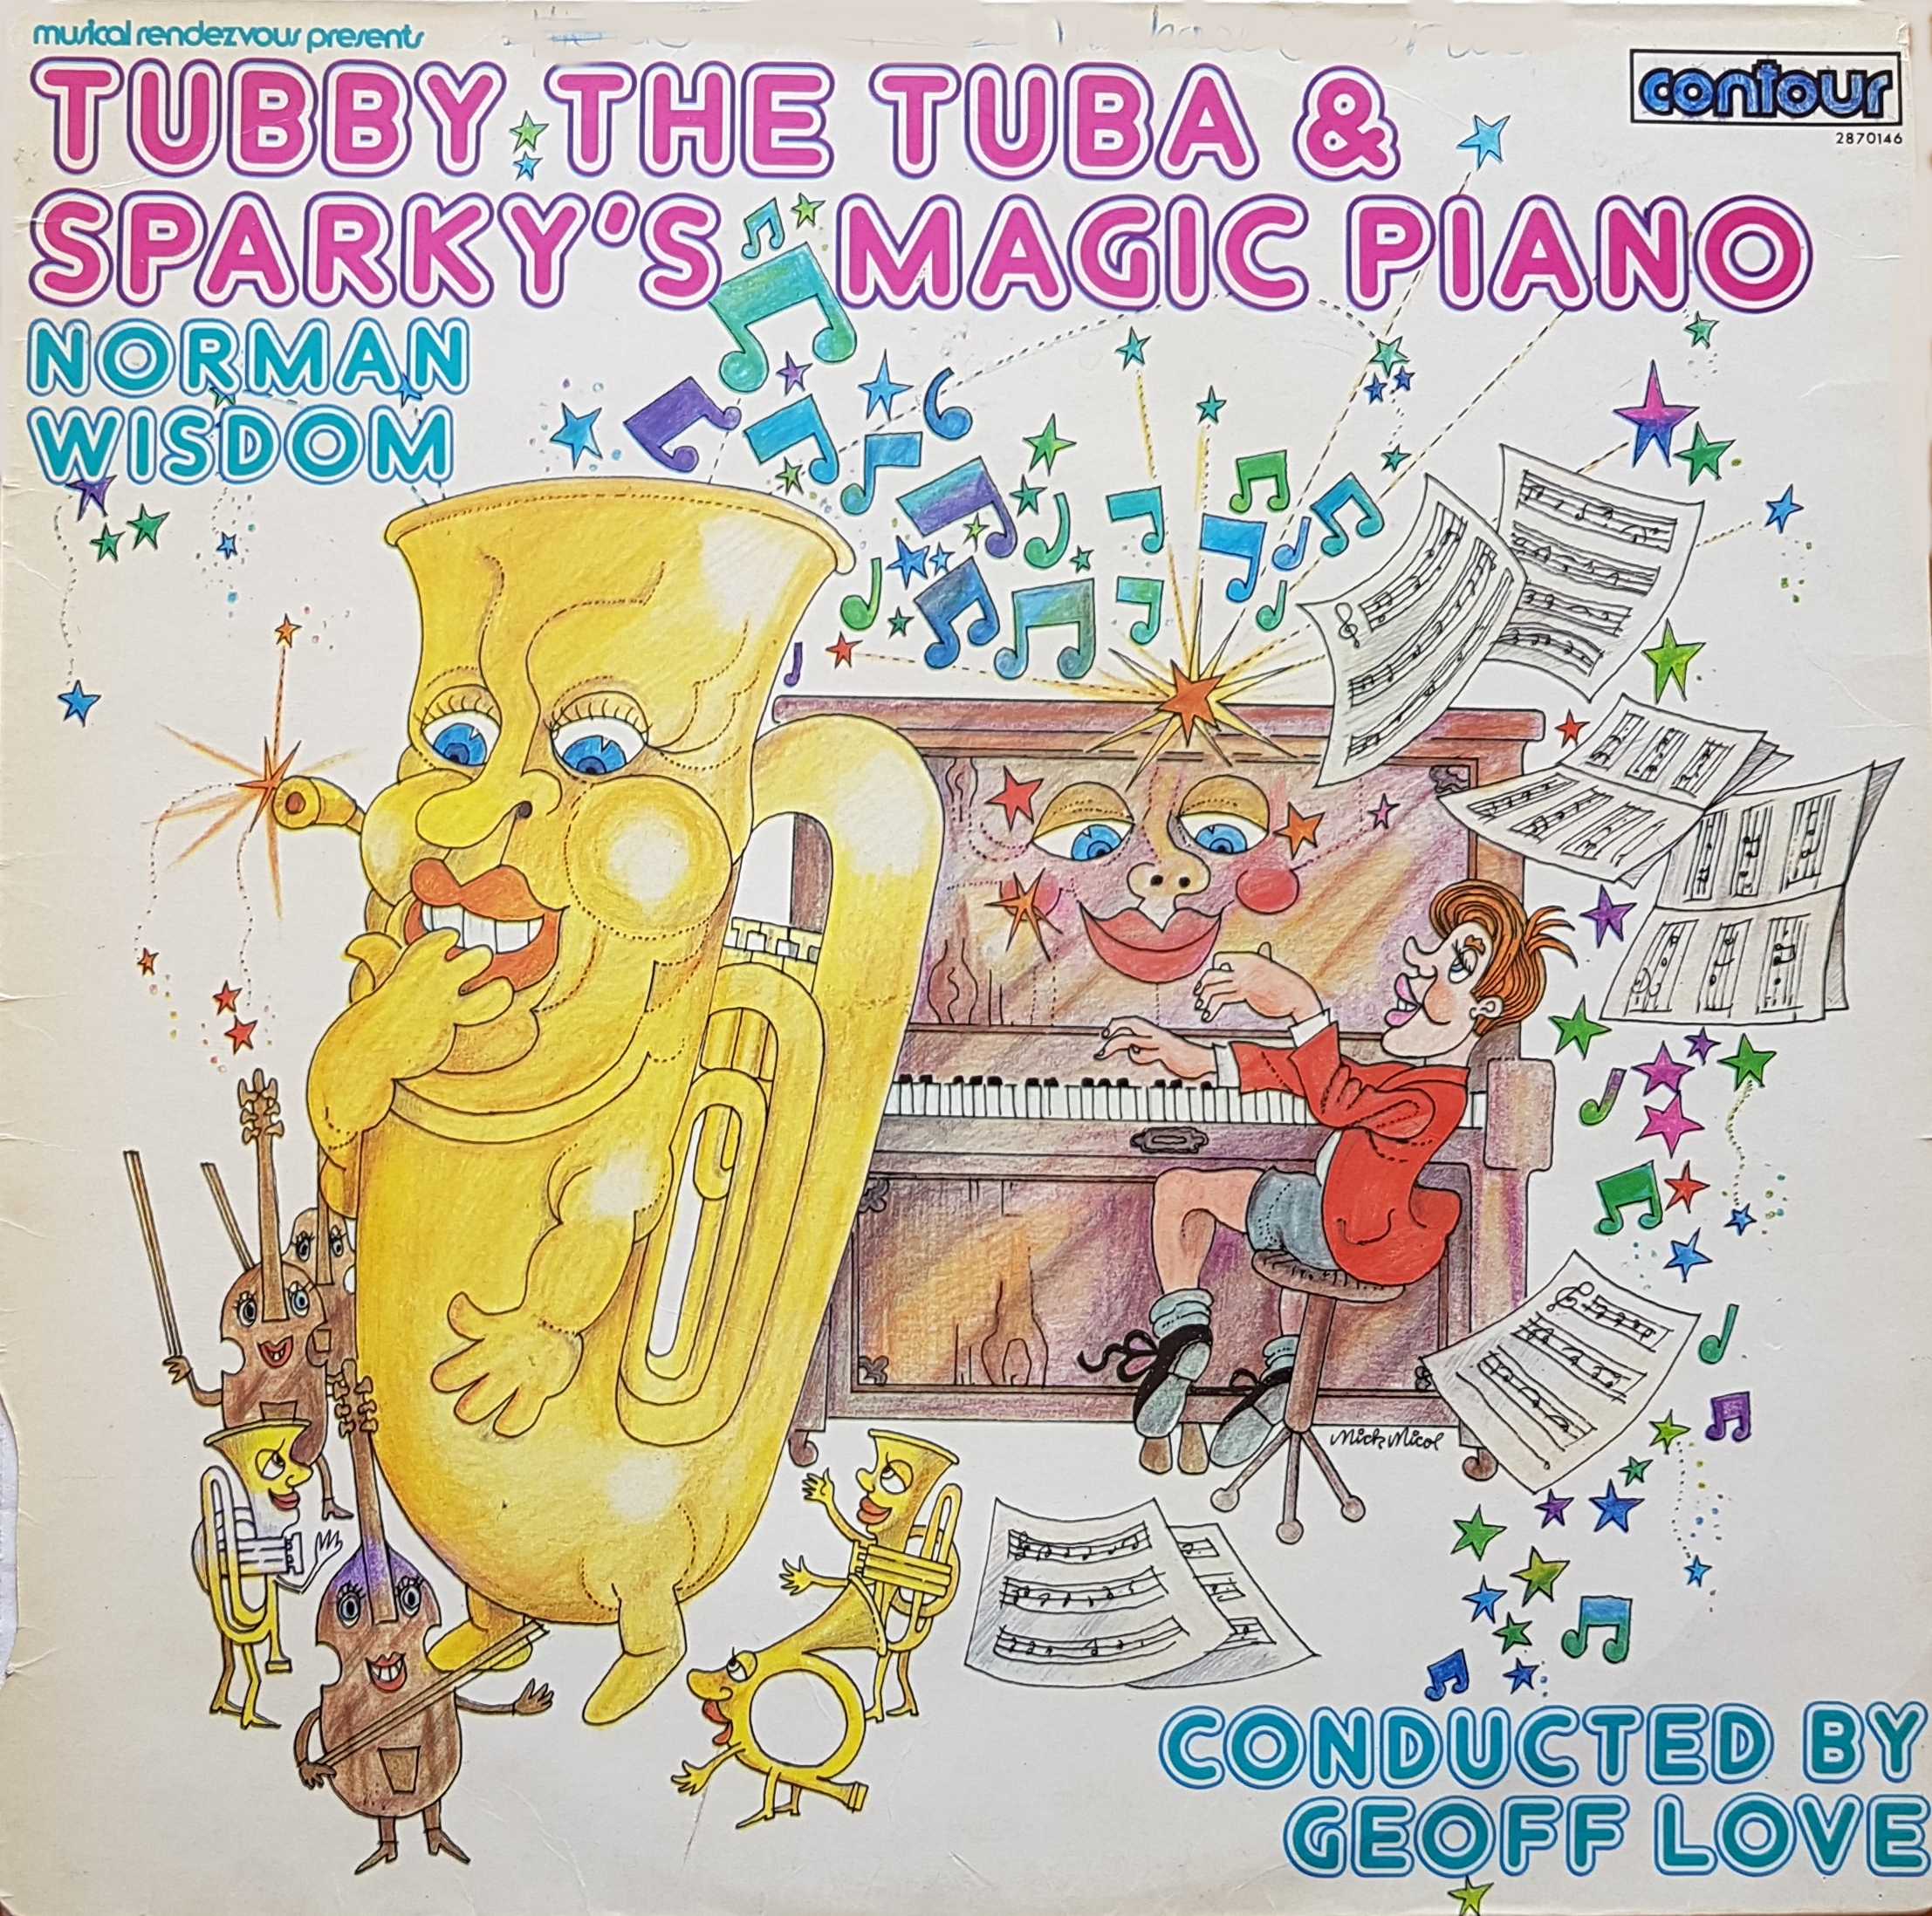 Picture of Tubby the tuba & Sparky's magic piano by artist Kleinsinger-Tripp / Alan Livingston from ITV, Channel 4 and Channel 5 albums library